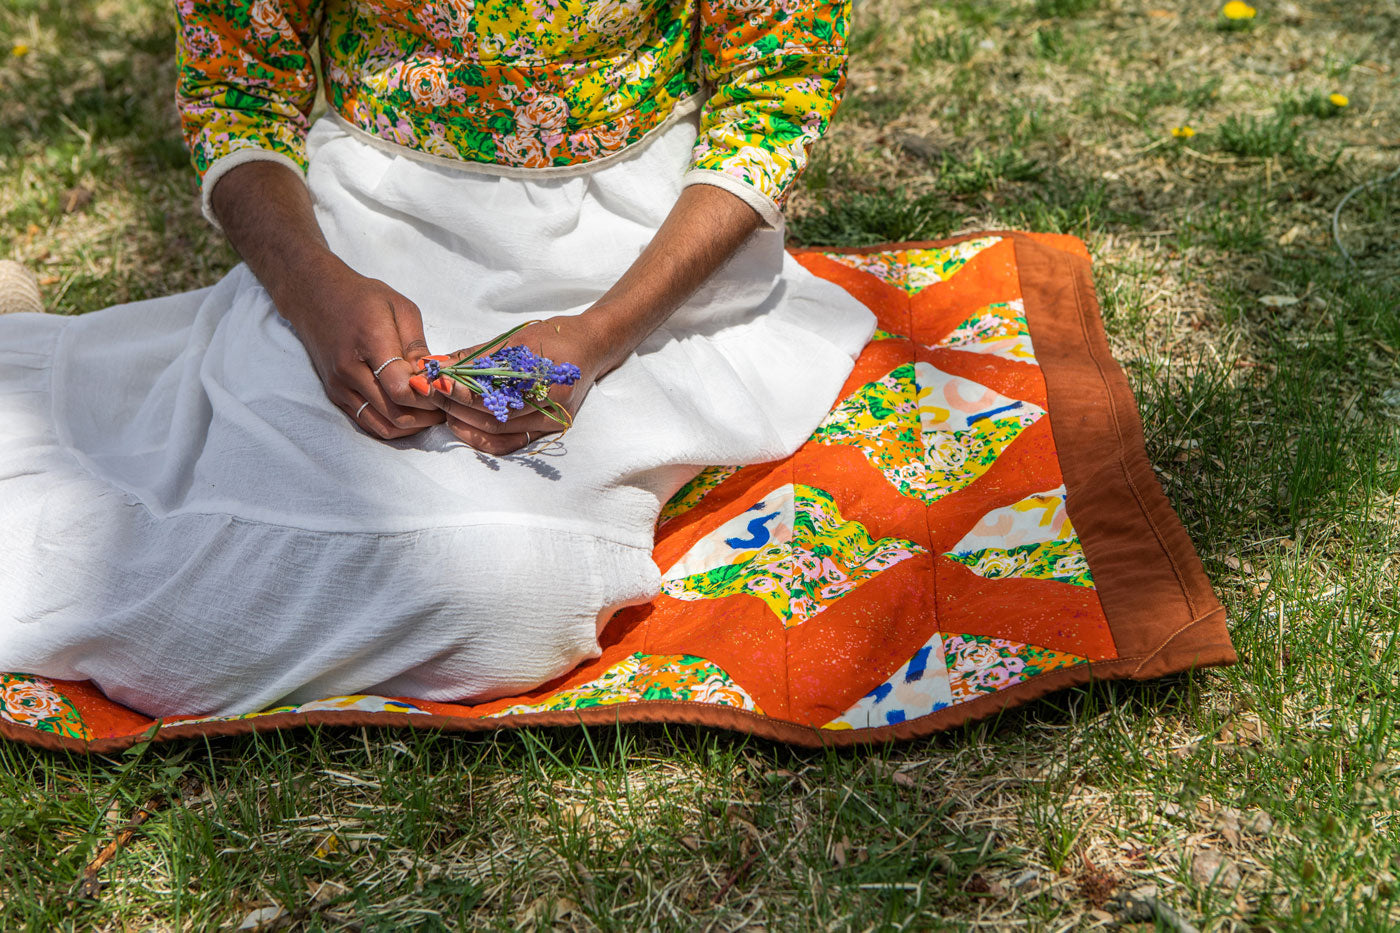 This is a close up image of Beza sitting on her Charming Xs quilt, which is laid out on a grassy lawn. She holds a small bouquet of purple flowers in her hands. 